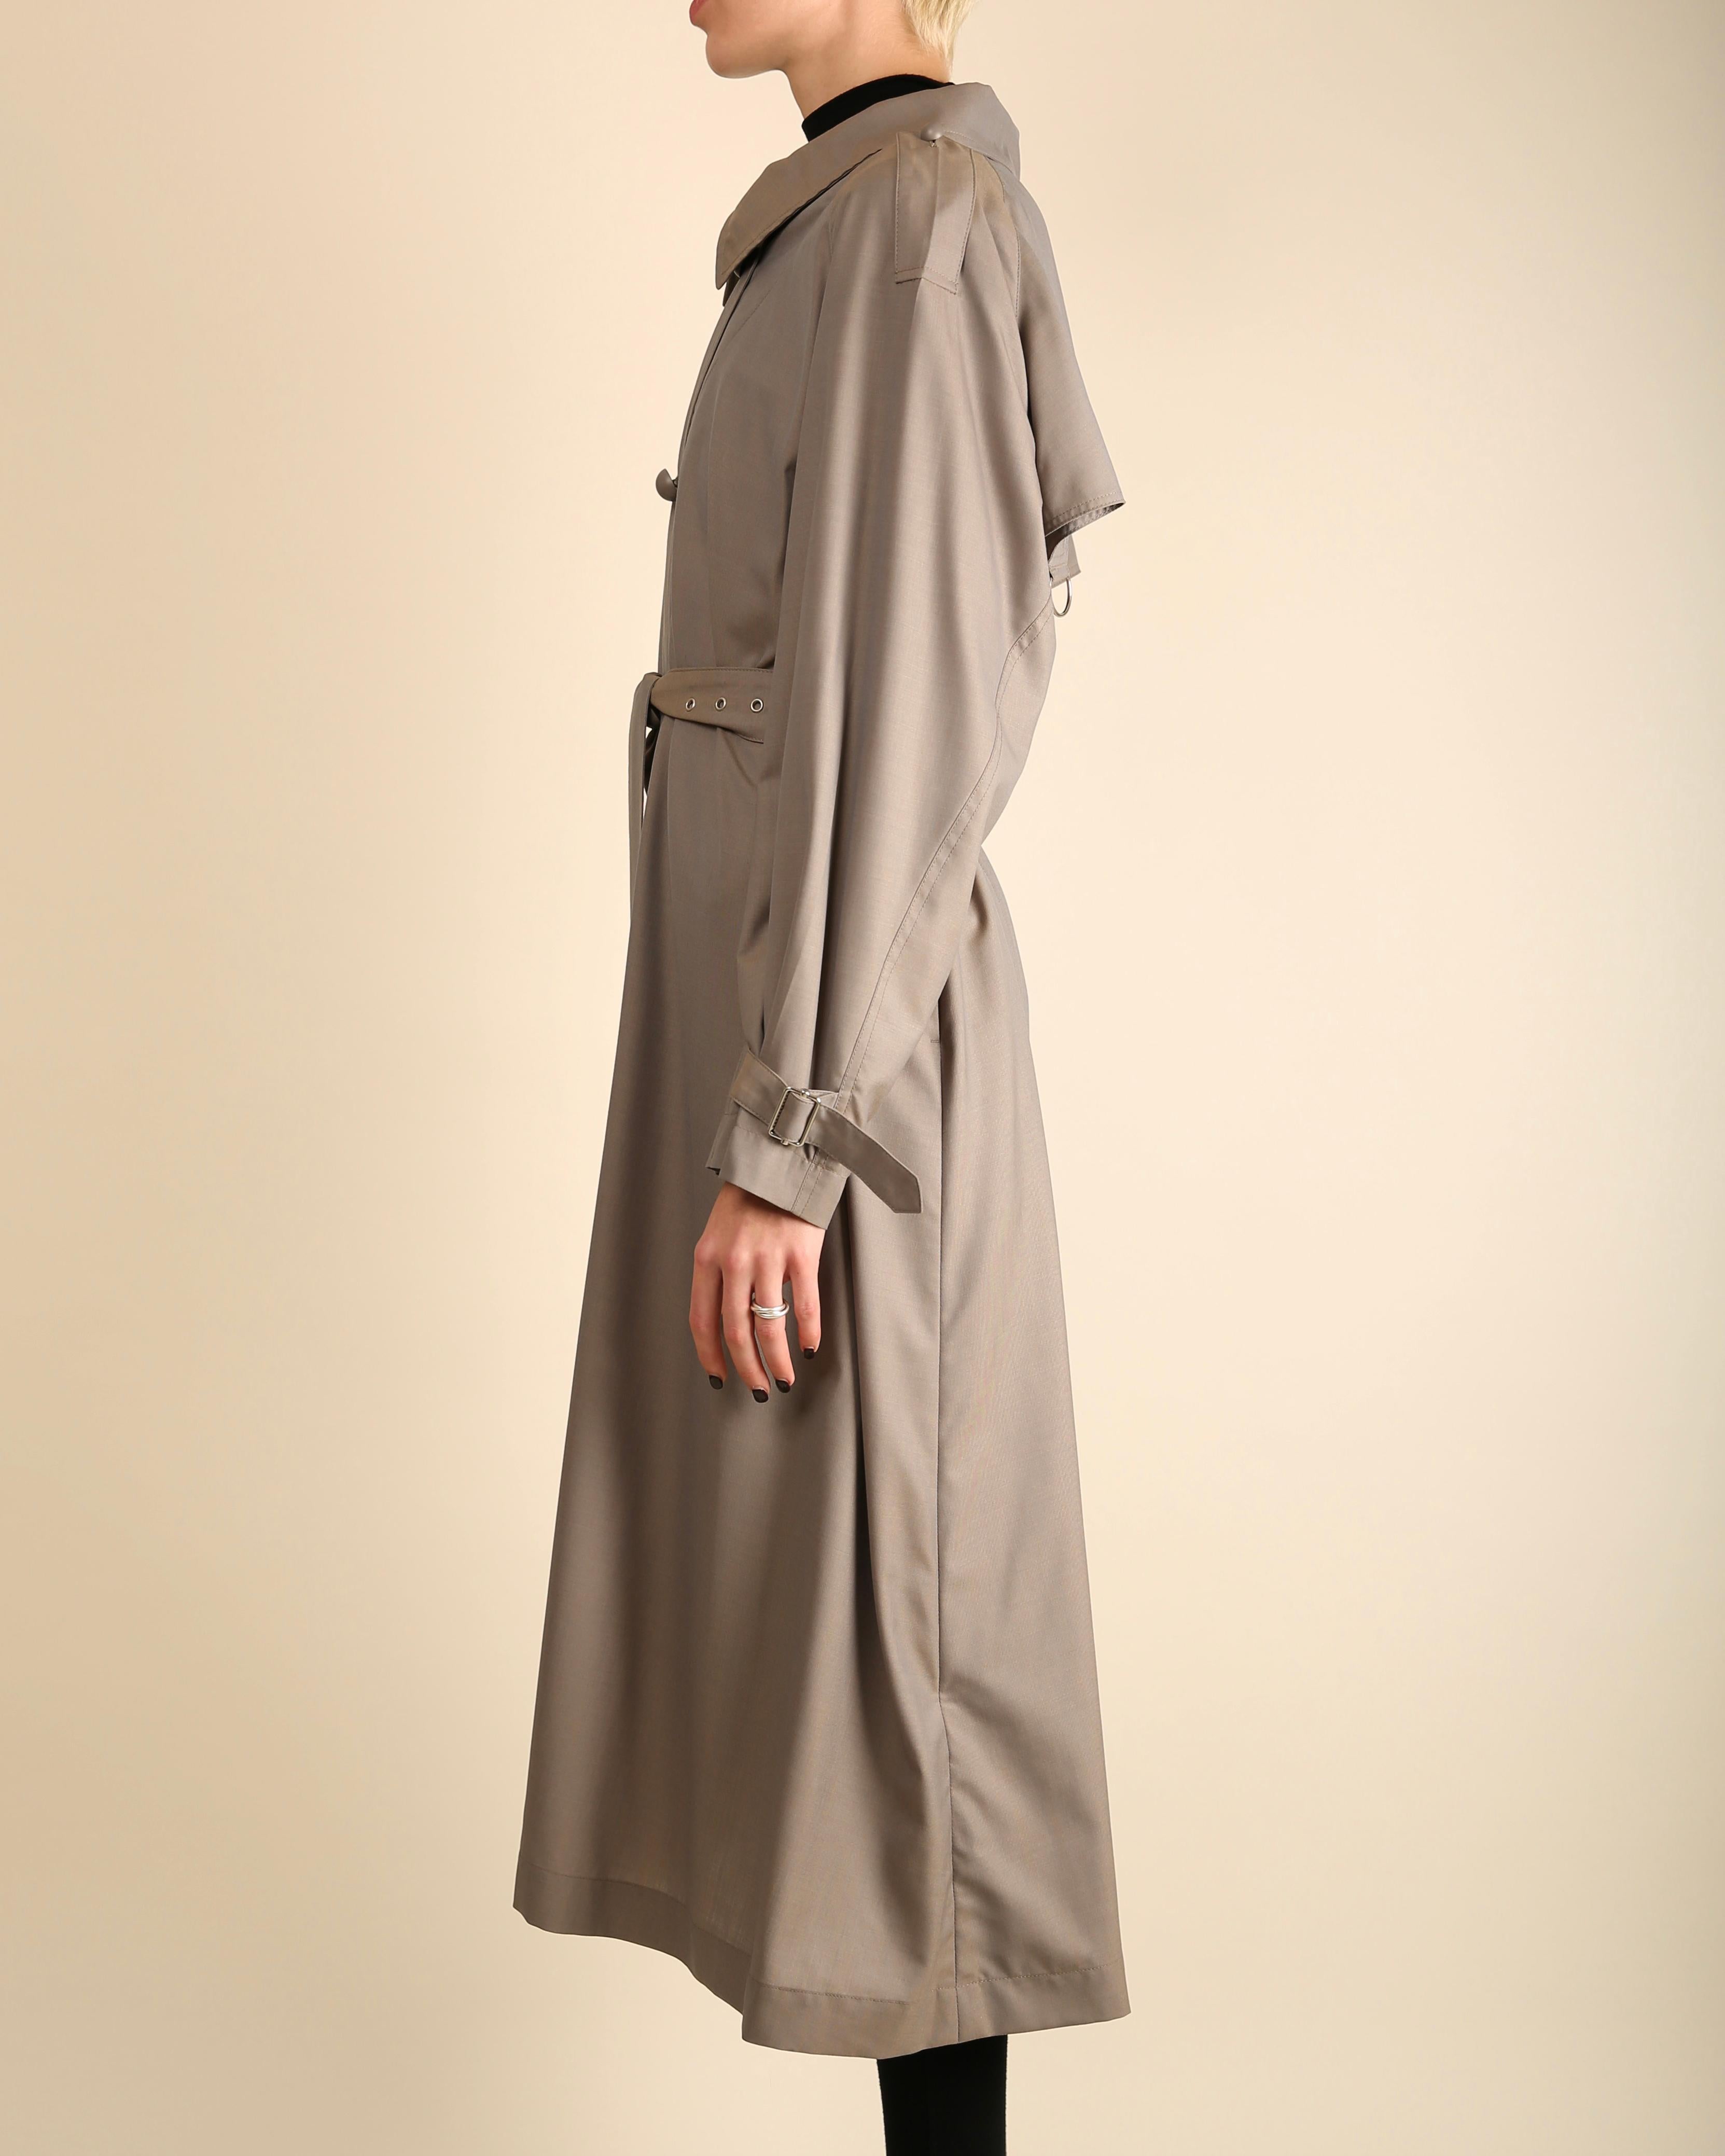 Celine Fall 2017 grey oversized maxi belted wool cashmere trench coat FR 36 6